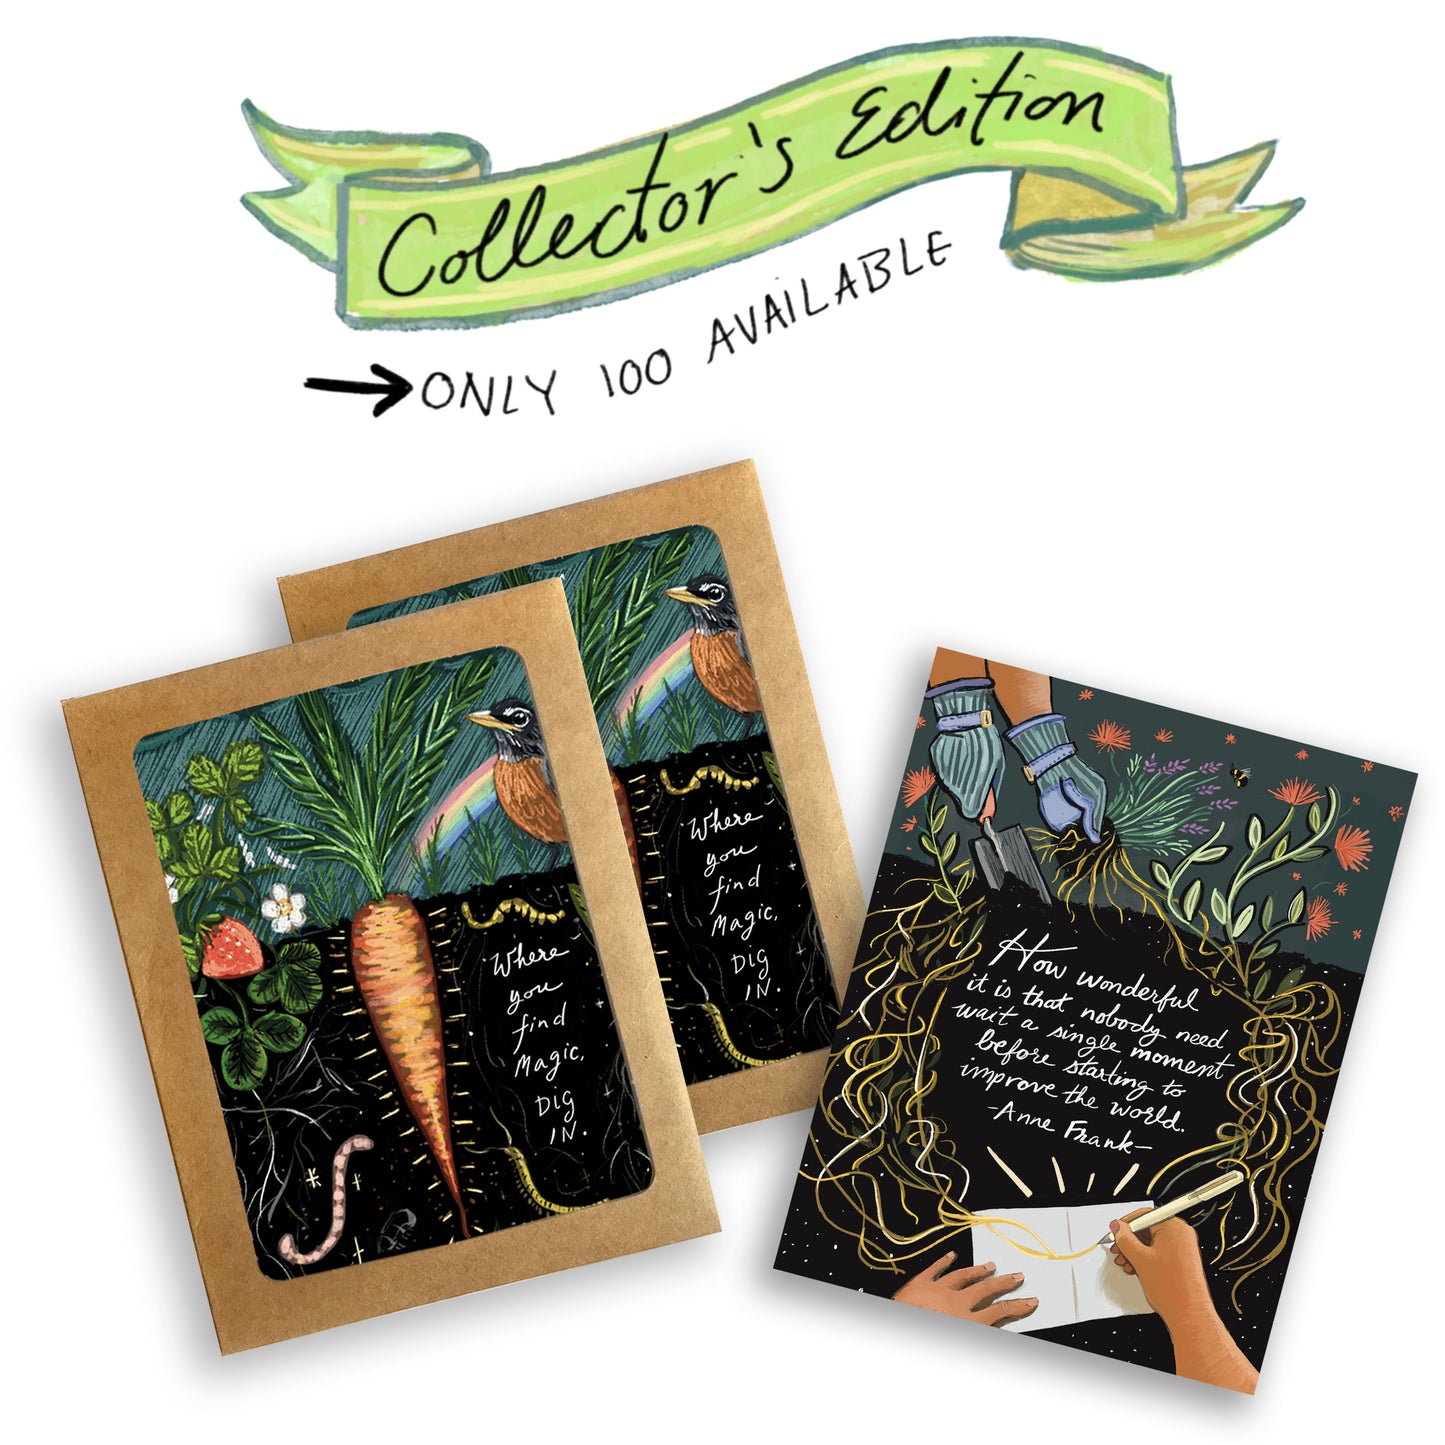 *Collector's Edition* Set of The Garden Collection